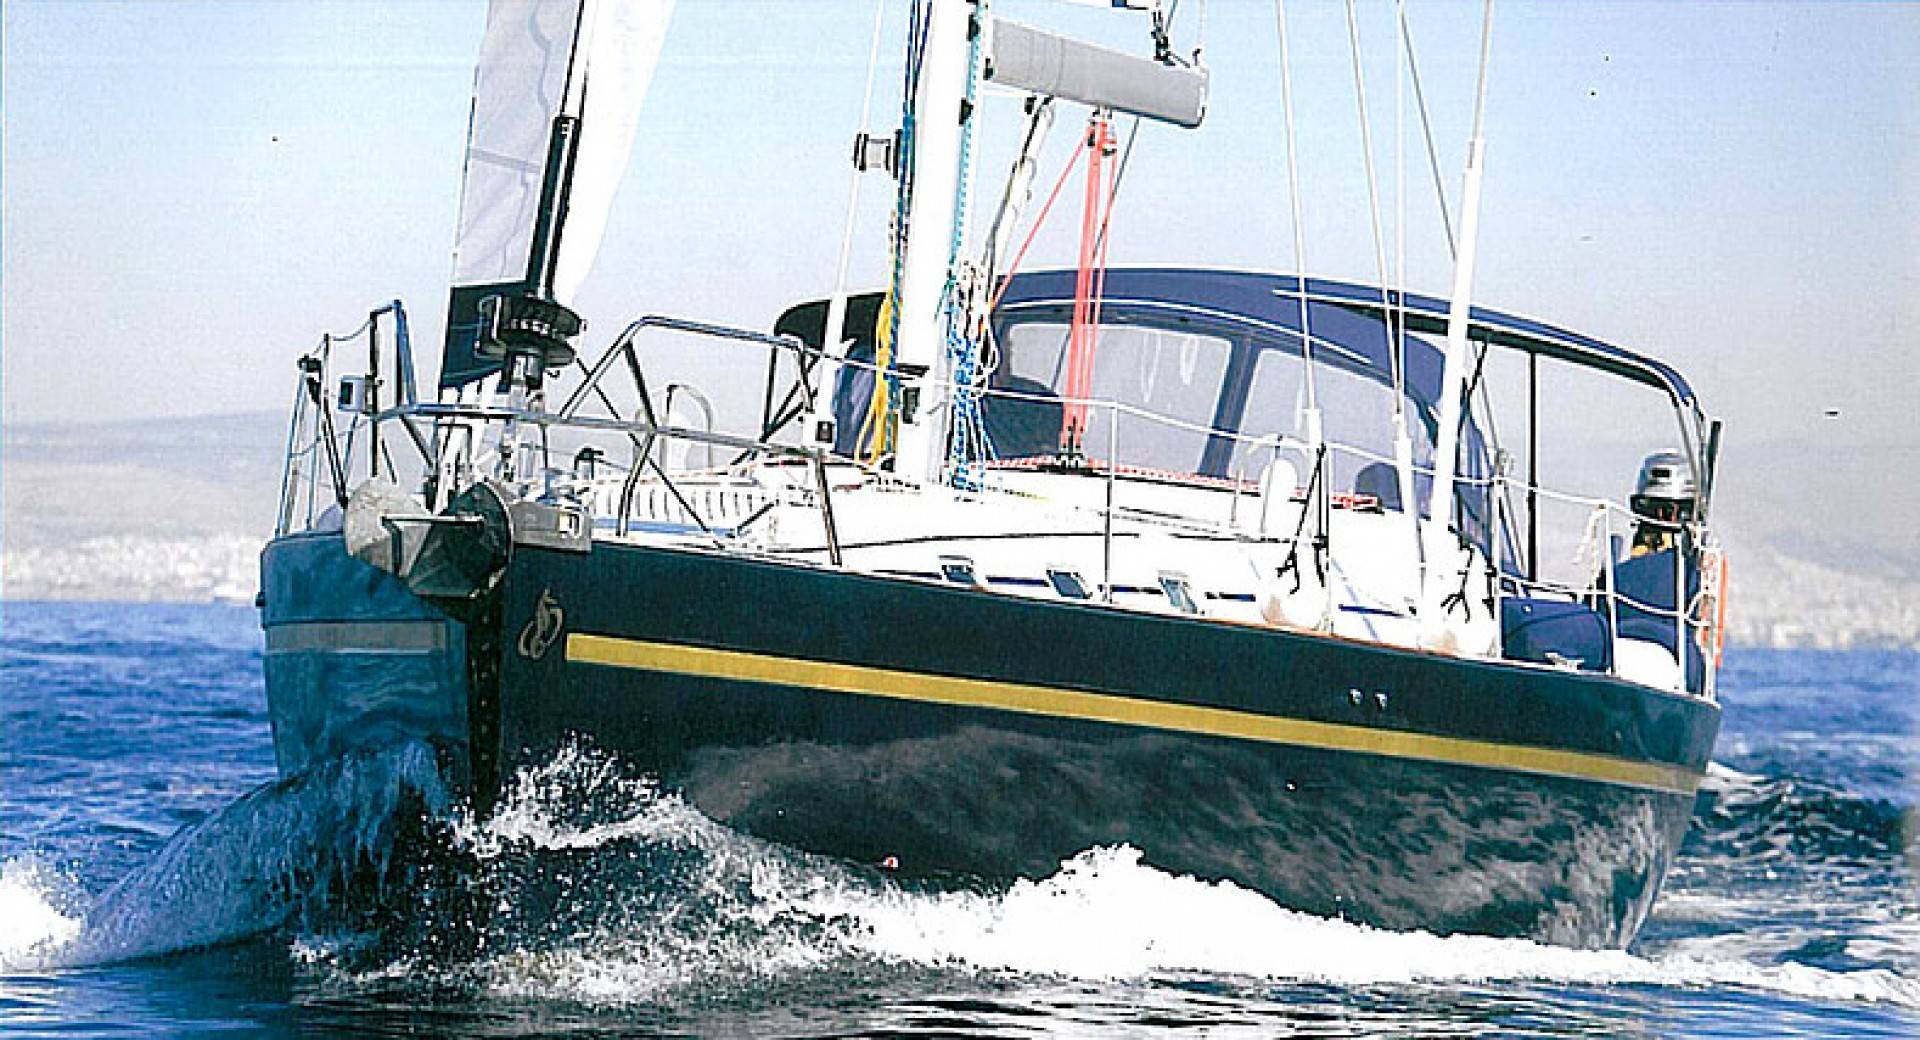 Luxury Sailing Yacht 56ft for cruises in Greek islands